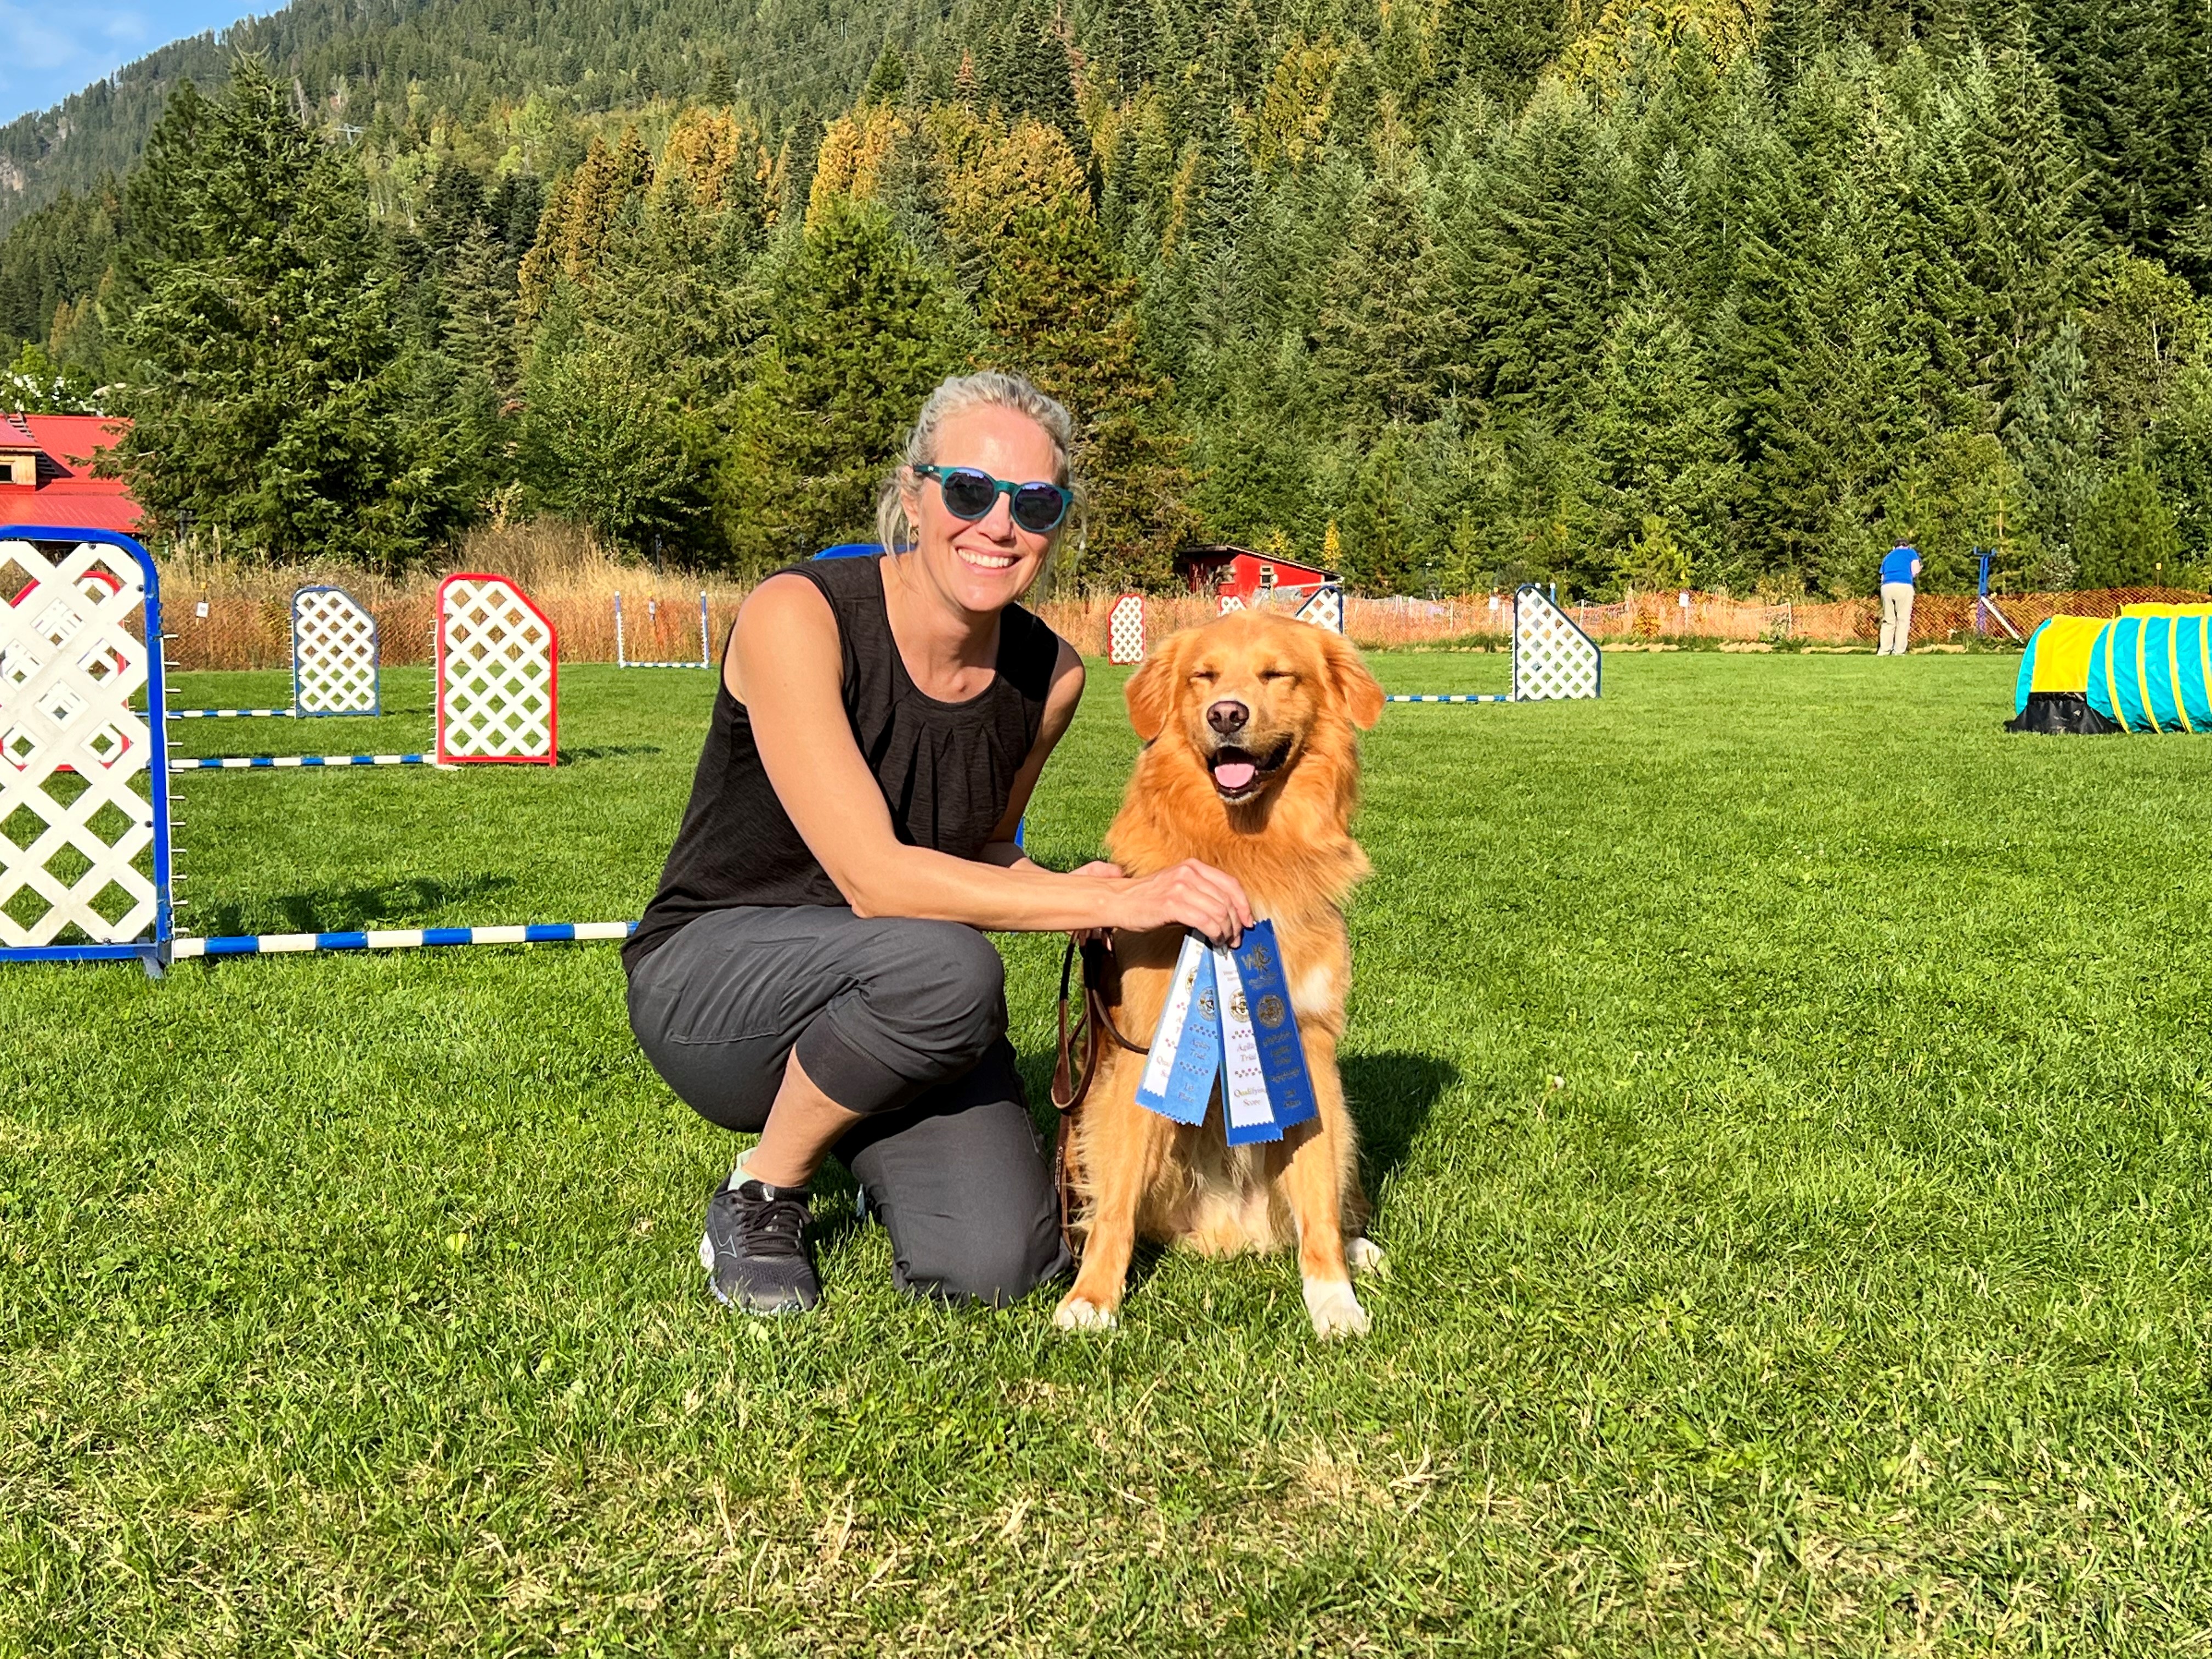 A smiling woman in a black tank top and grey pants holds a blue ribbon in front of an orange dog on a grassy field